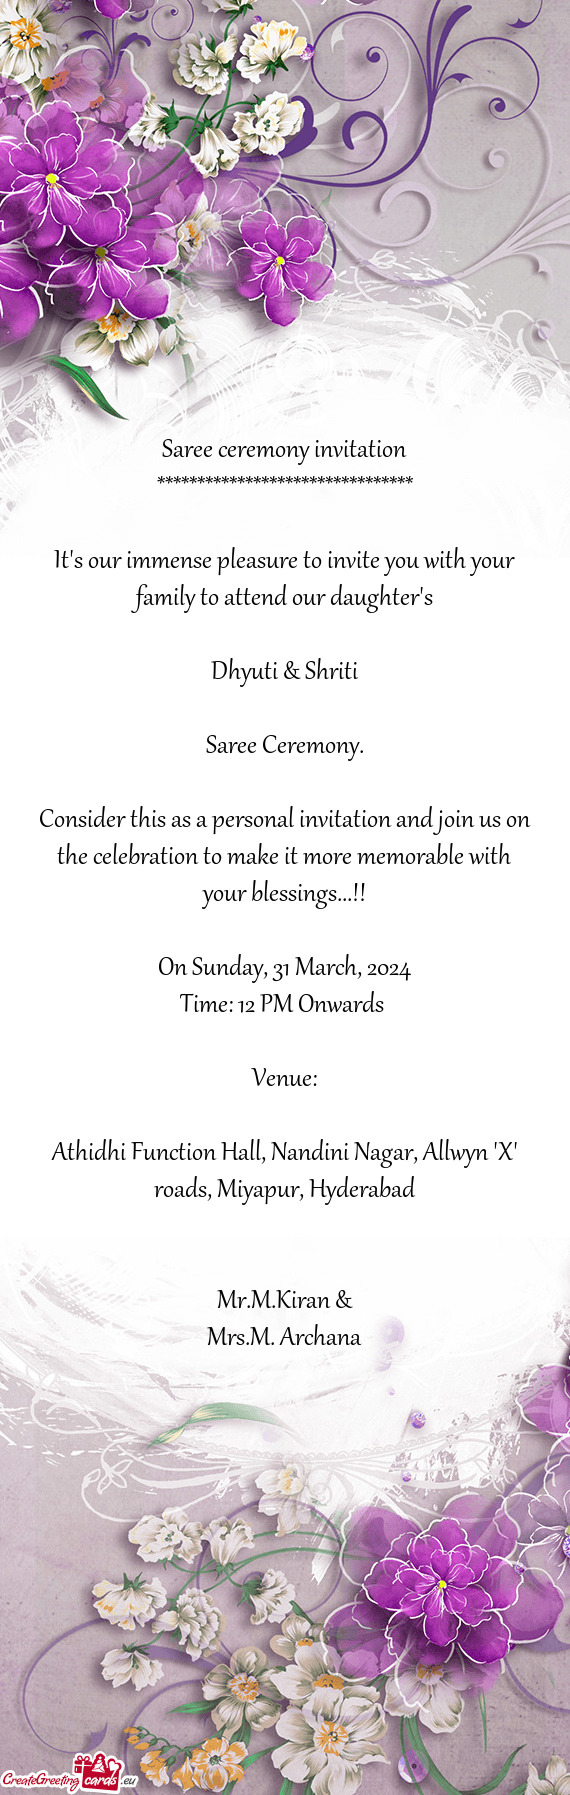 Consider this as a personal invitation and join us on the celebration to make it more memorable with